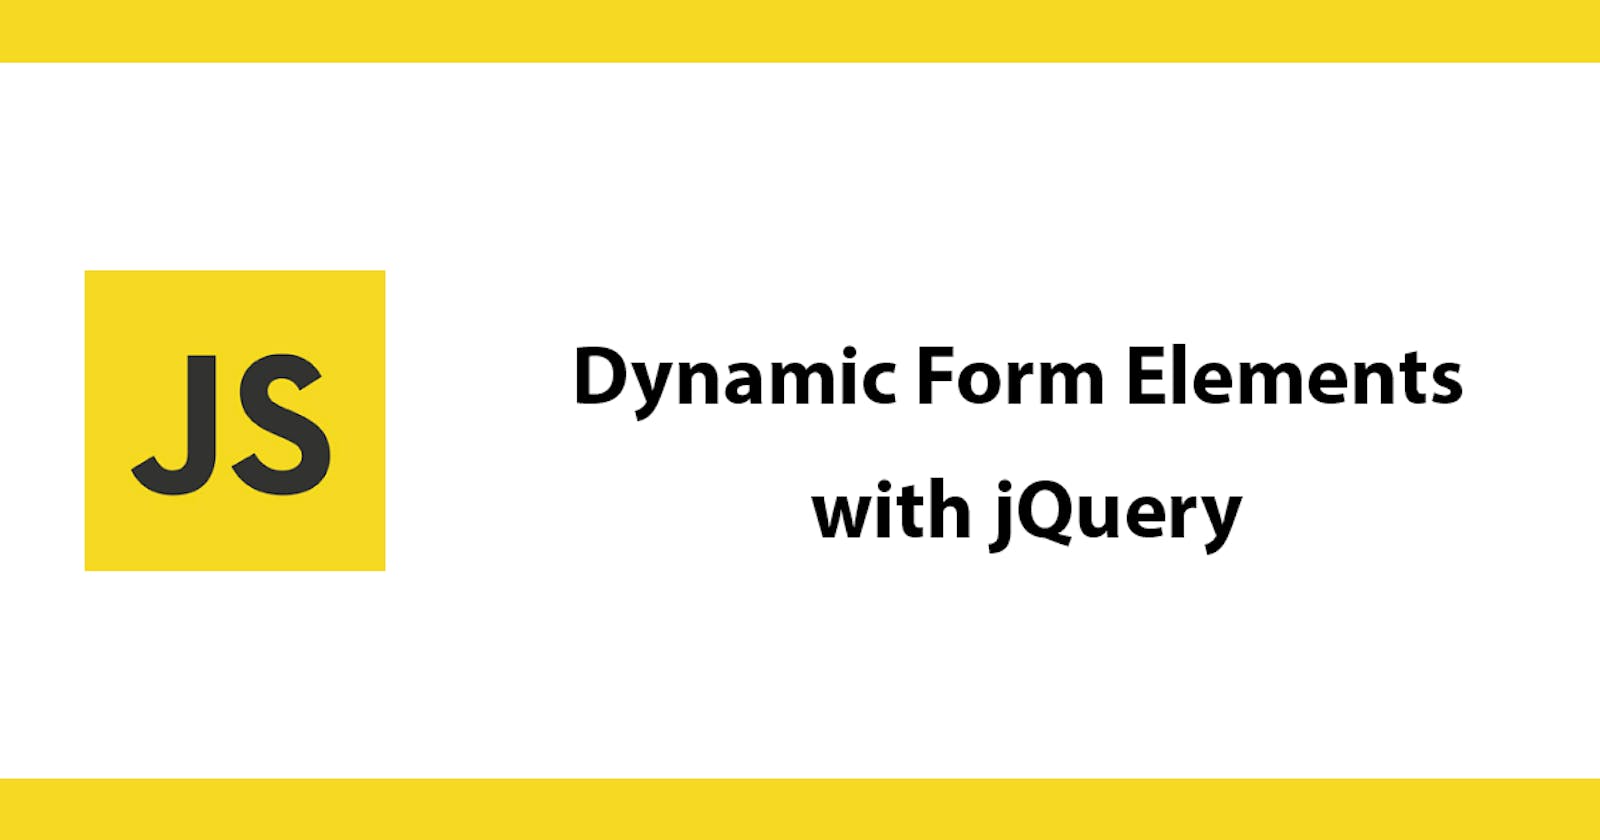 Dynamic Form Elements with jQuery